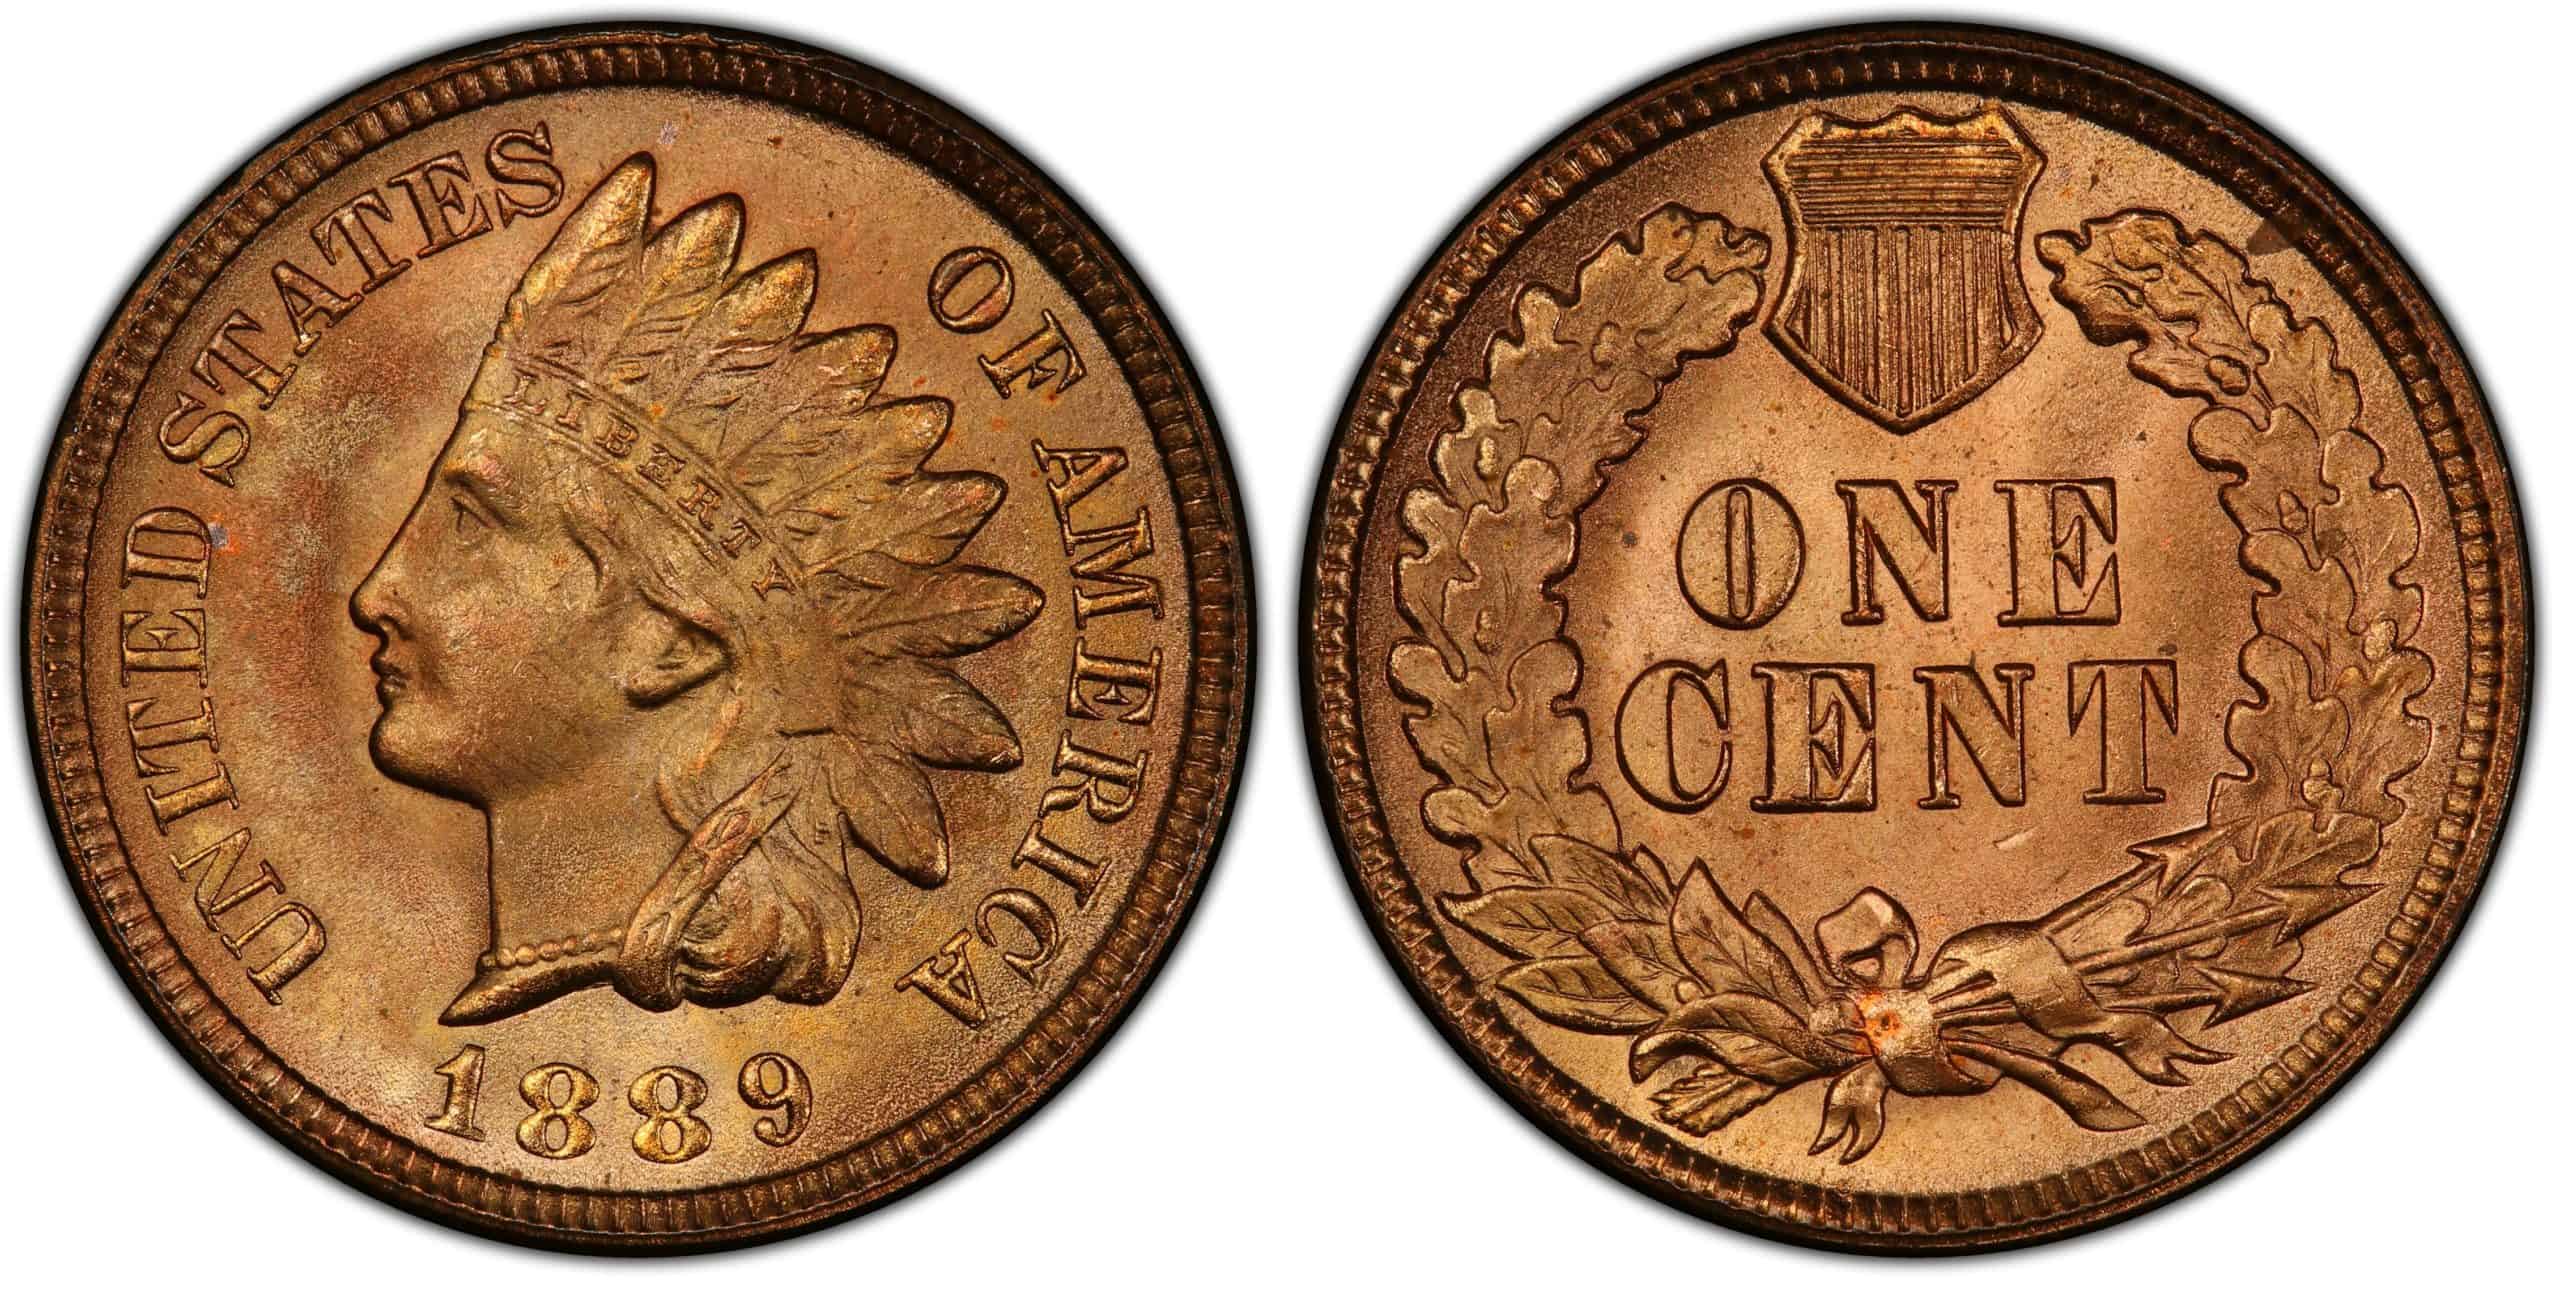 What is the 1889 Indian Head Penny